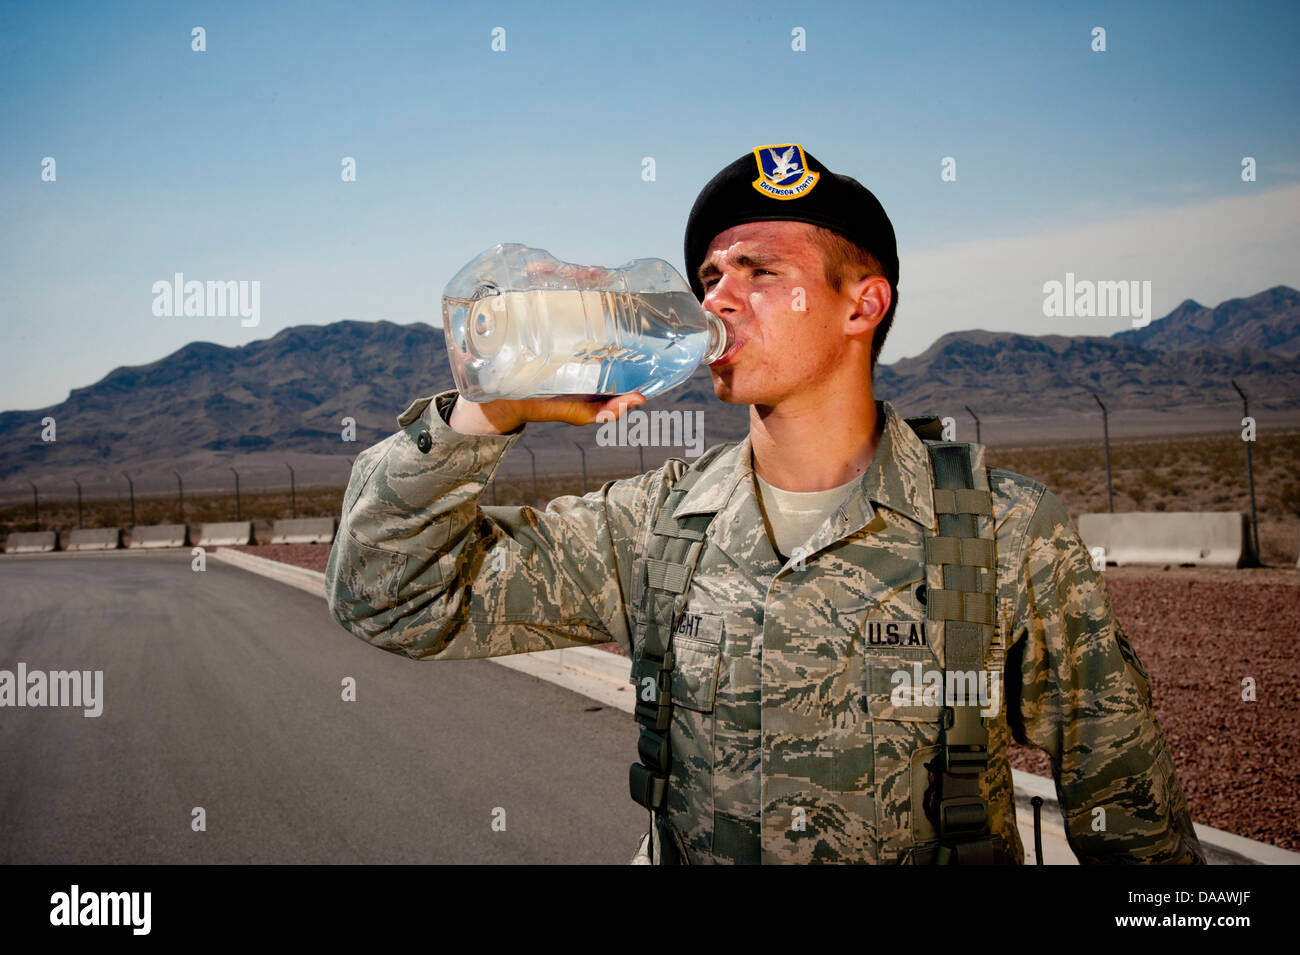 Airman 1st Class Jeffrey Albright, 99th Security Forces Squadron journeyman, drinks water in front of the Area 2 gate July 2, 2013, at Nellis Air Force Base, Nev. Working in near-record temperatures as high as 117 degrees, Airmen must hydrate frequently i Stock Photo